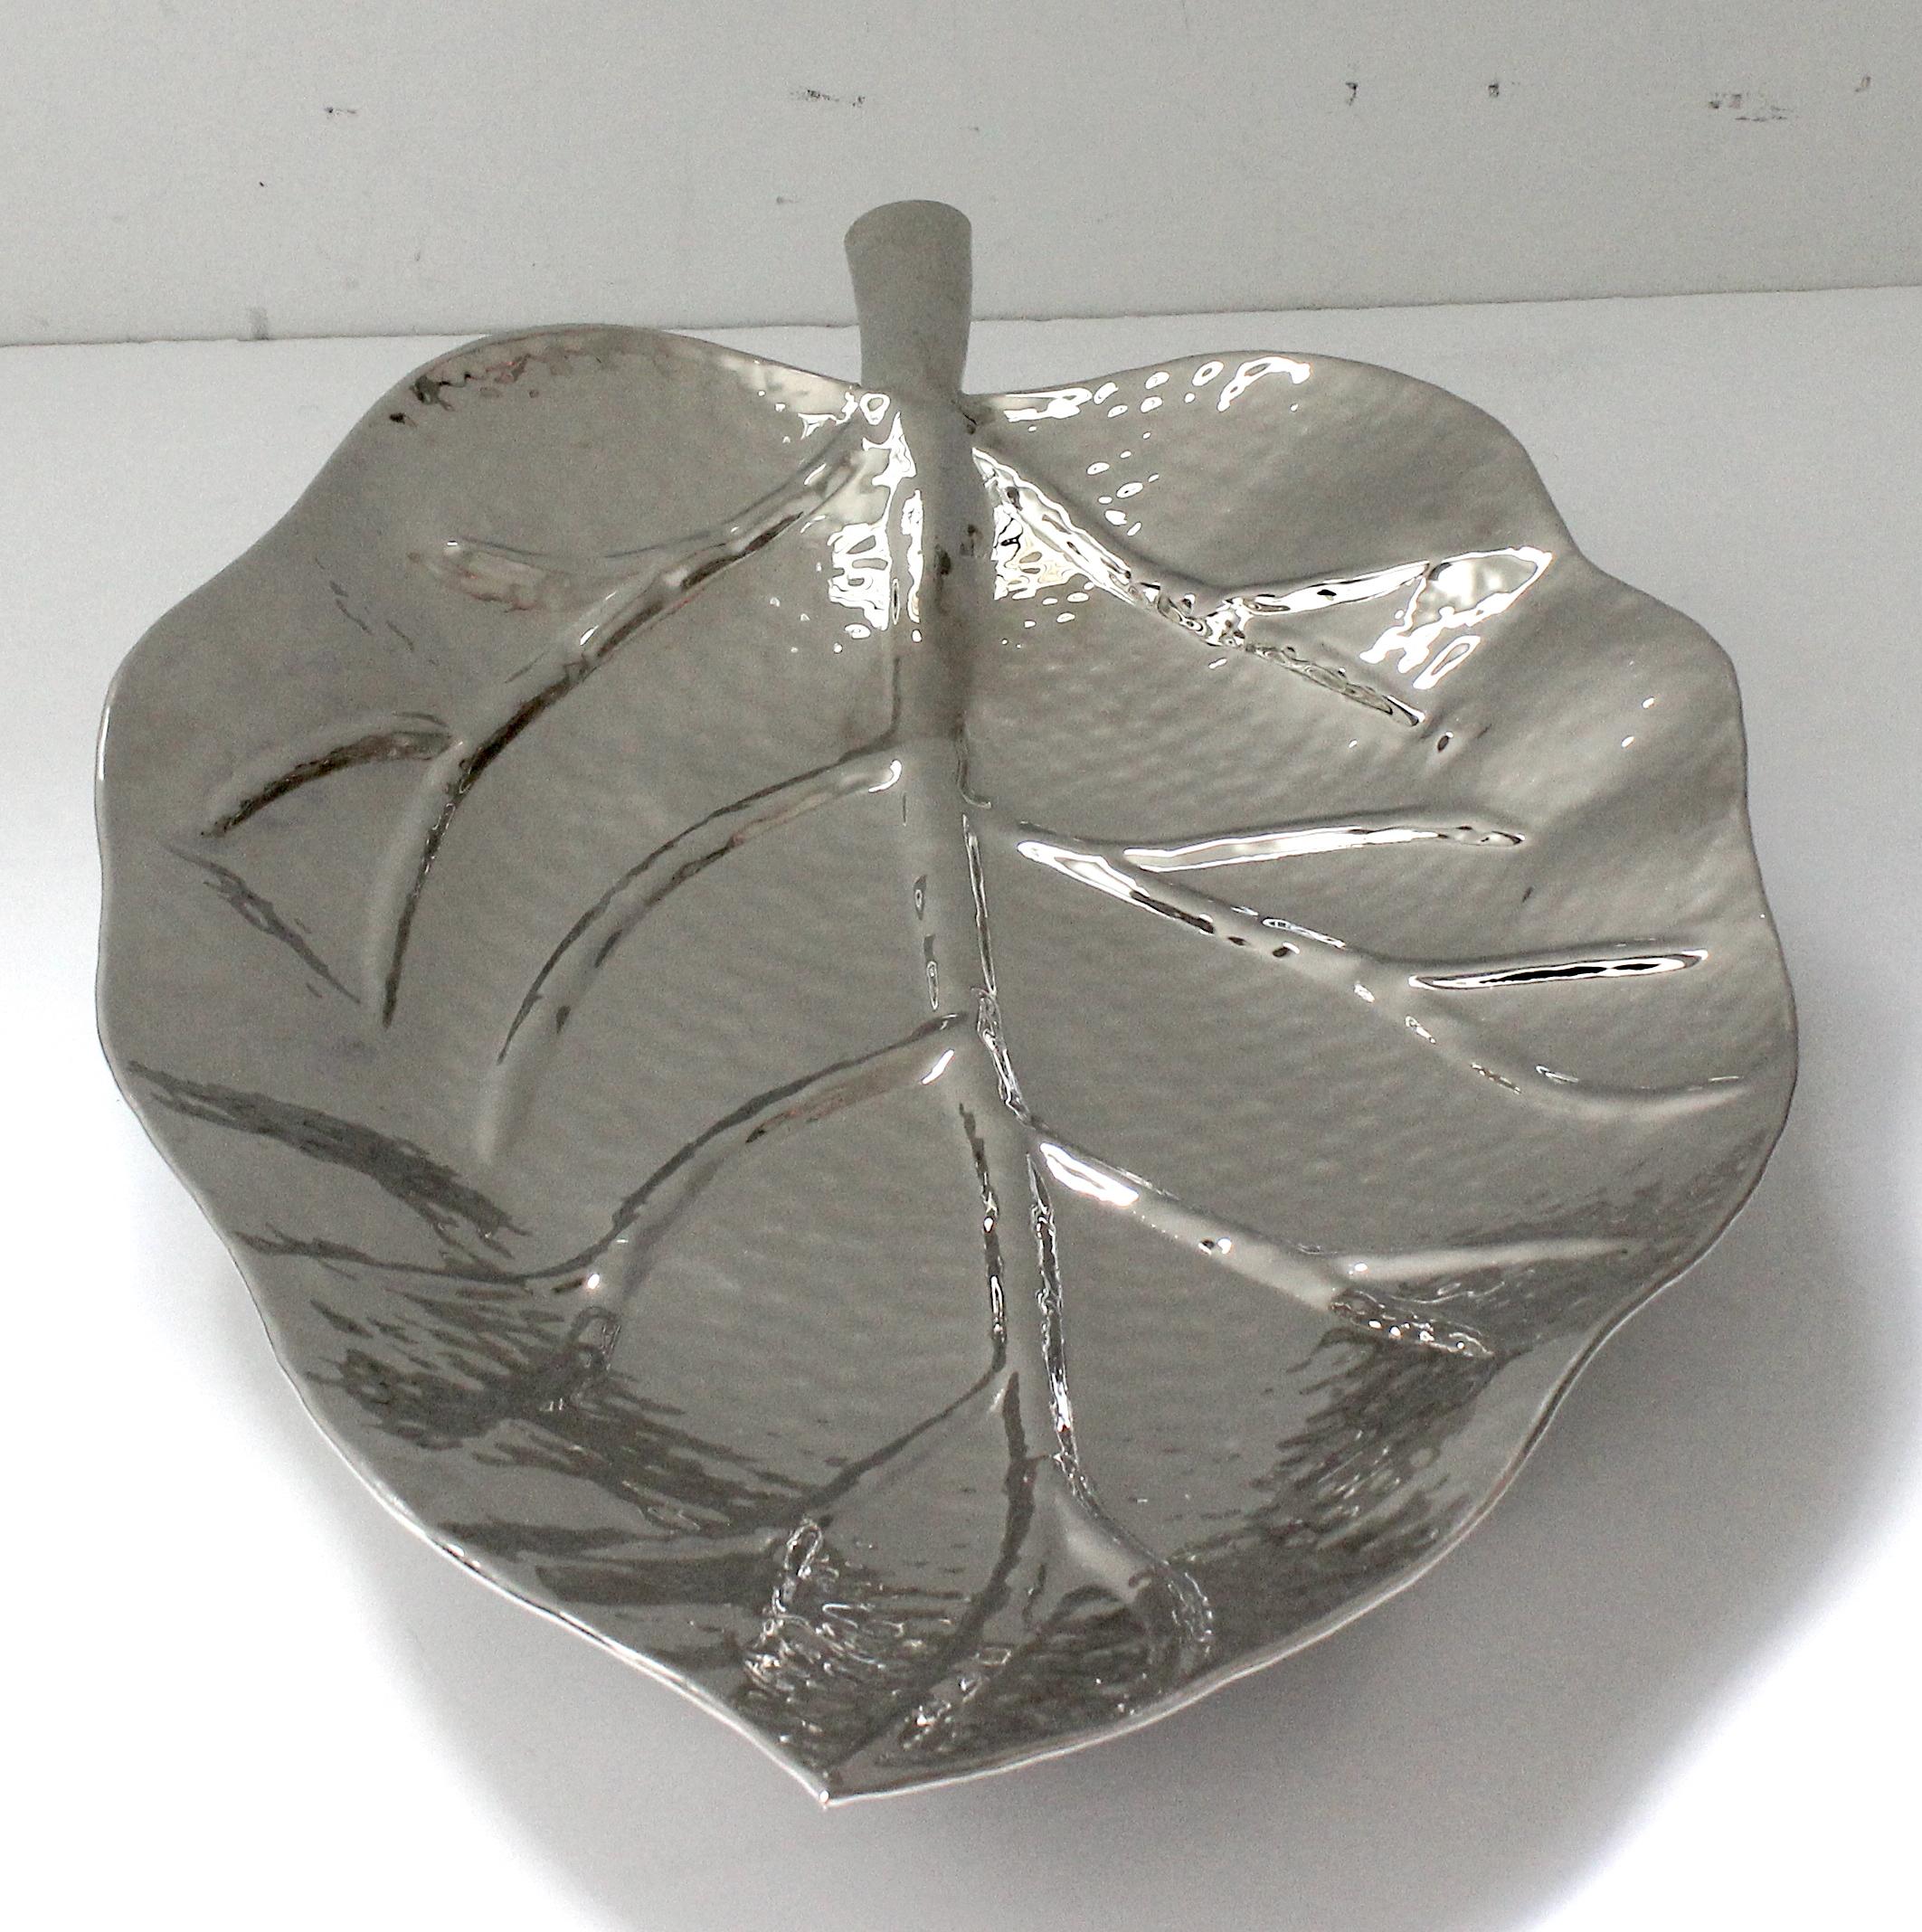 American Nickel Plated Leaf Form Serving Tray by Iconic Snob Galeries For Sale